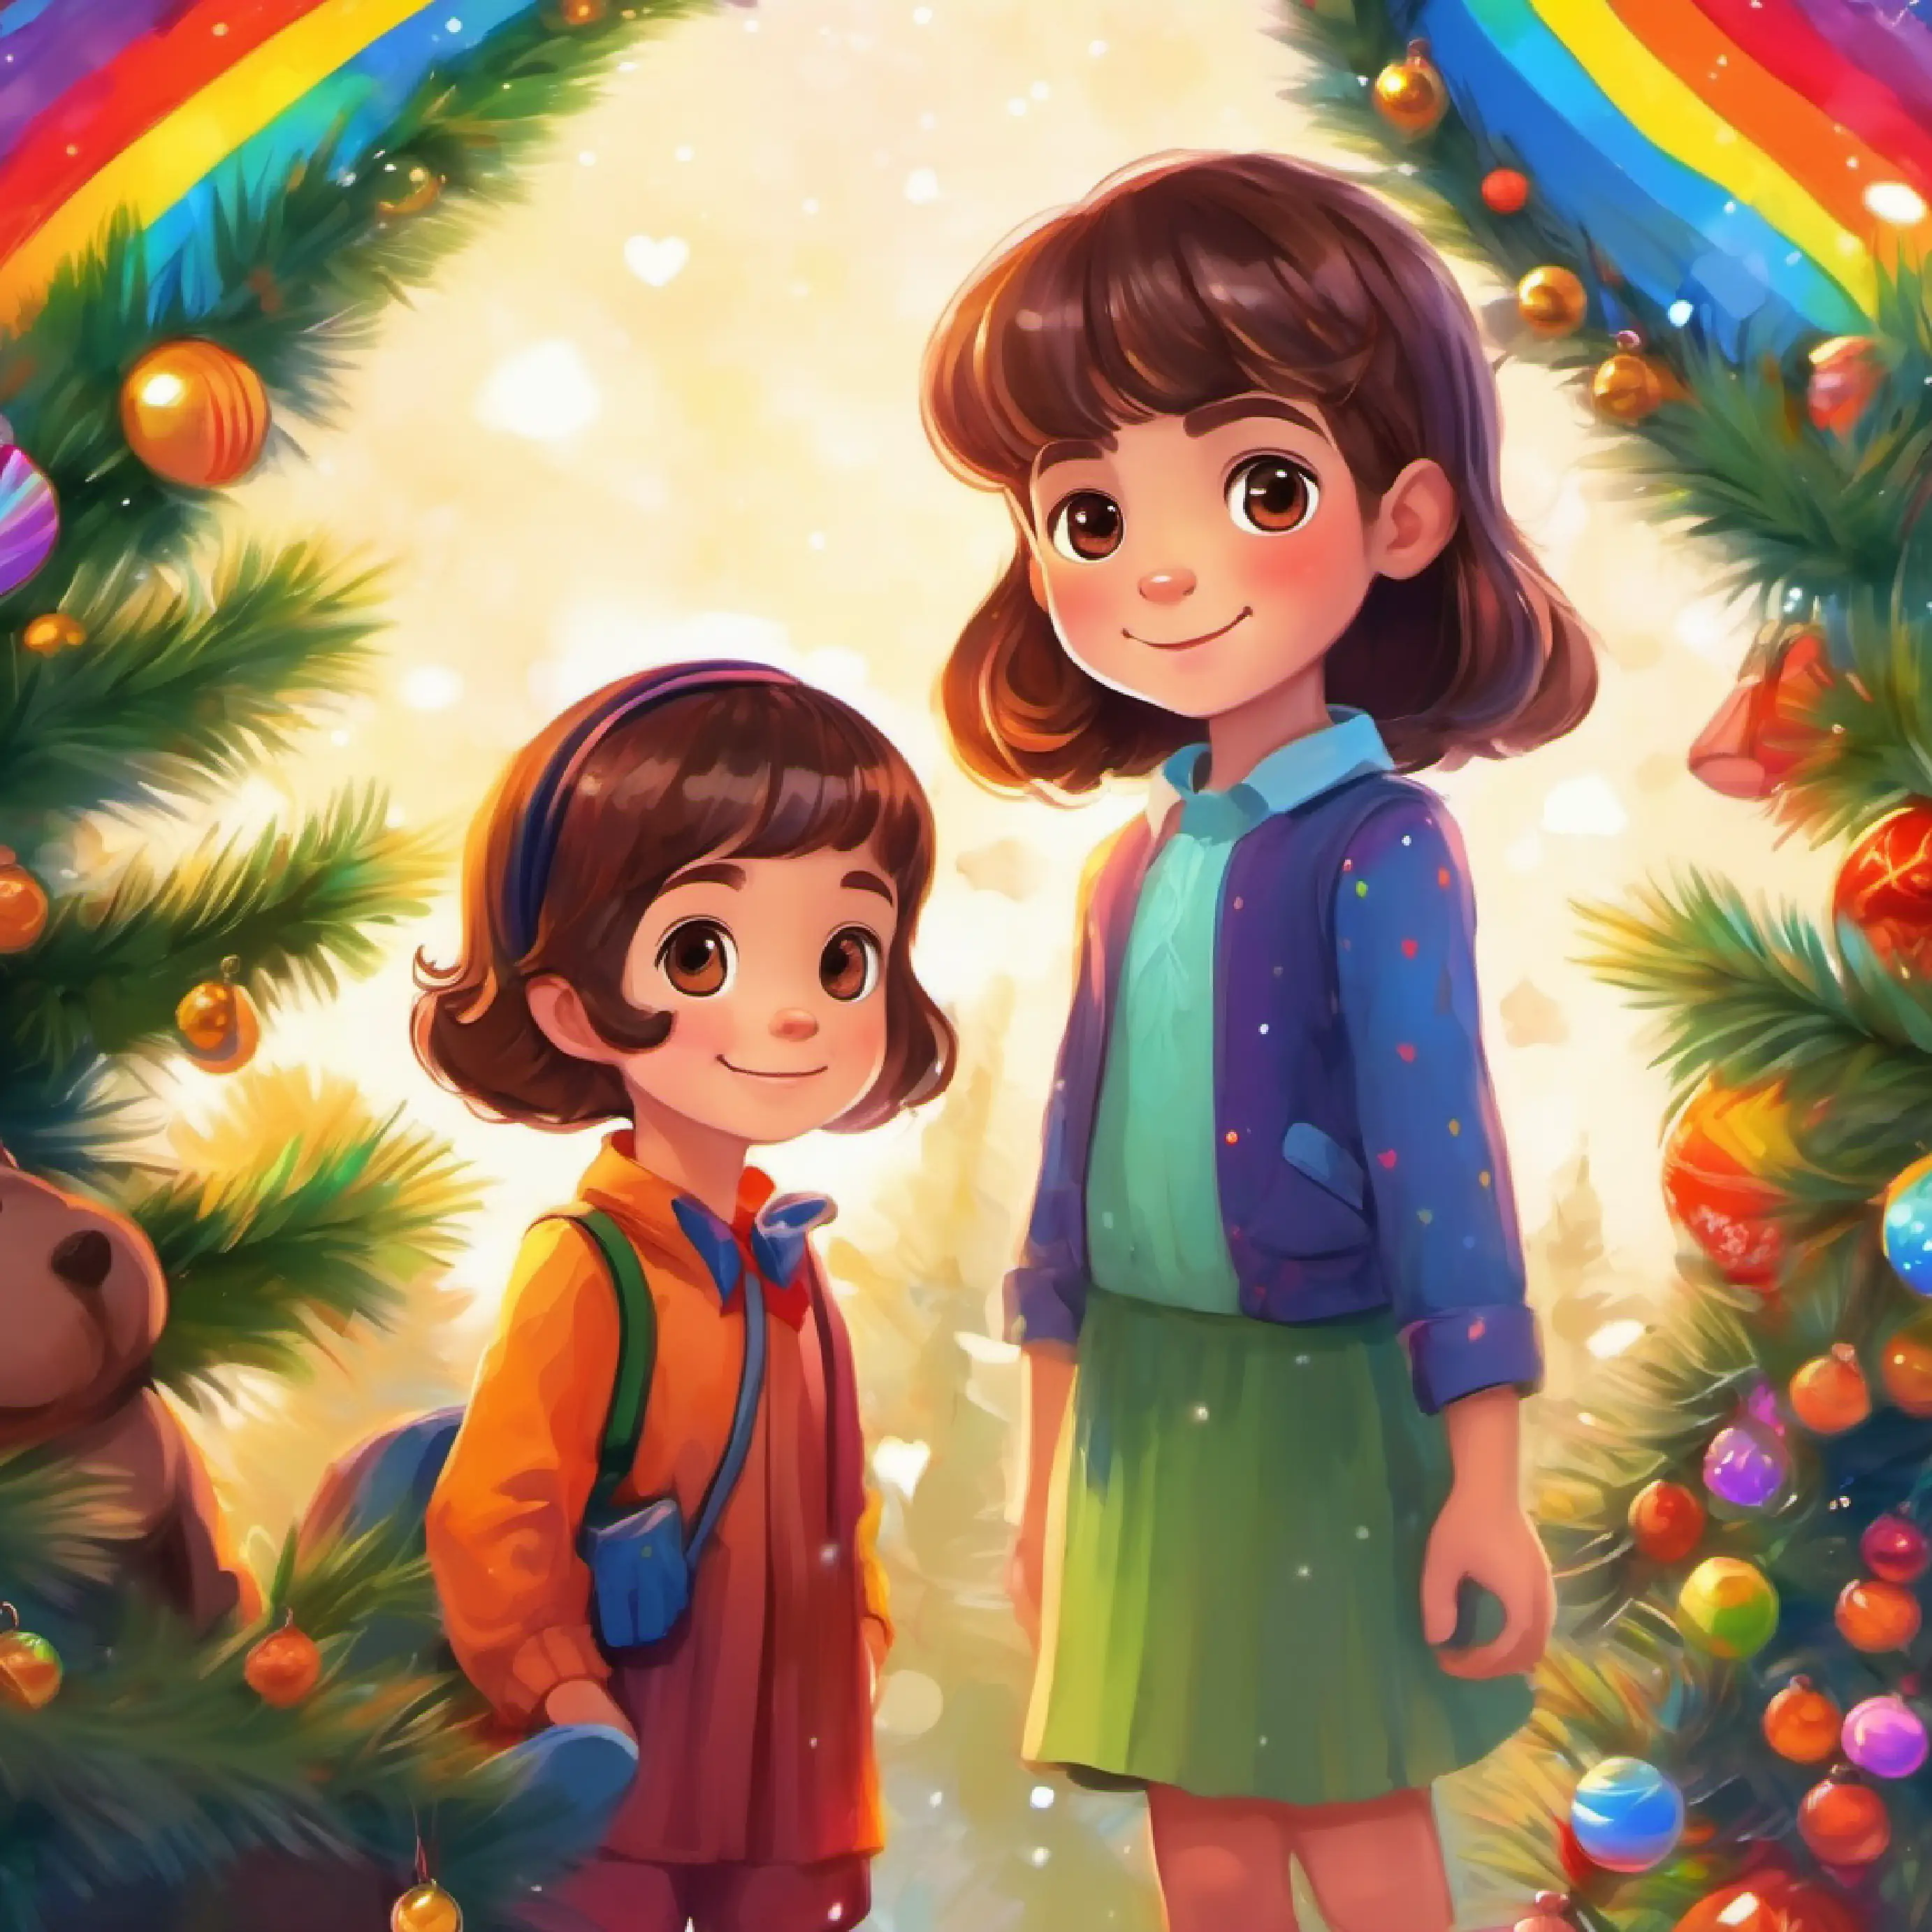 Introduction to Curious child, wears colorful clothing, short brown hair, kind brown eyes and their love for rainbow colors.